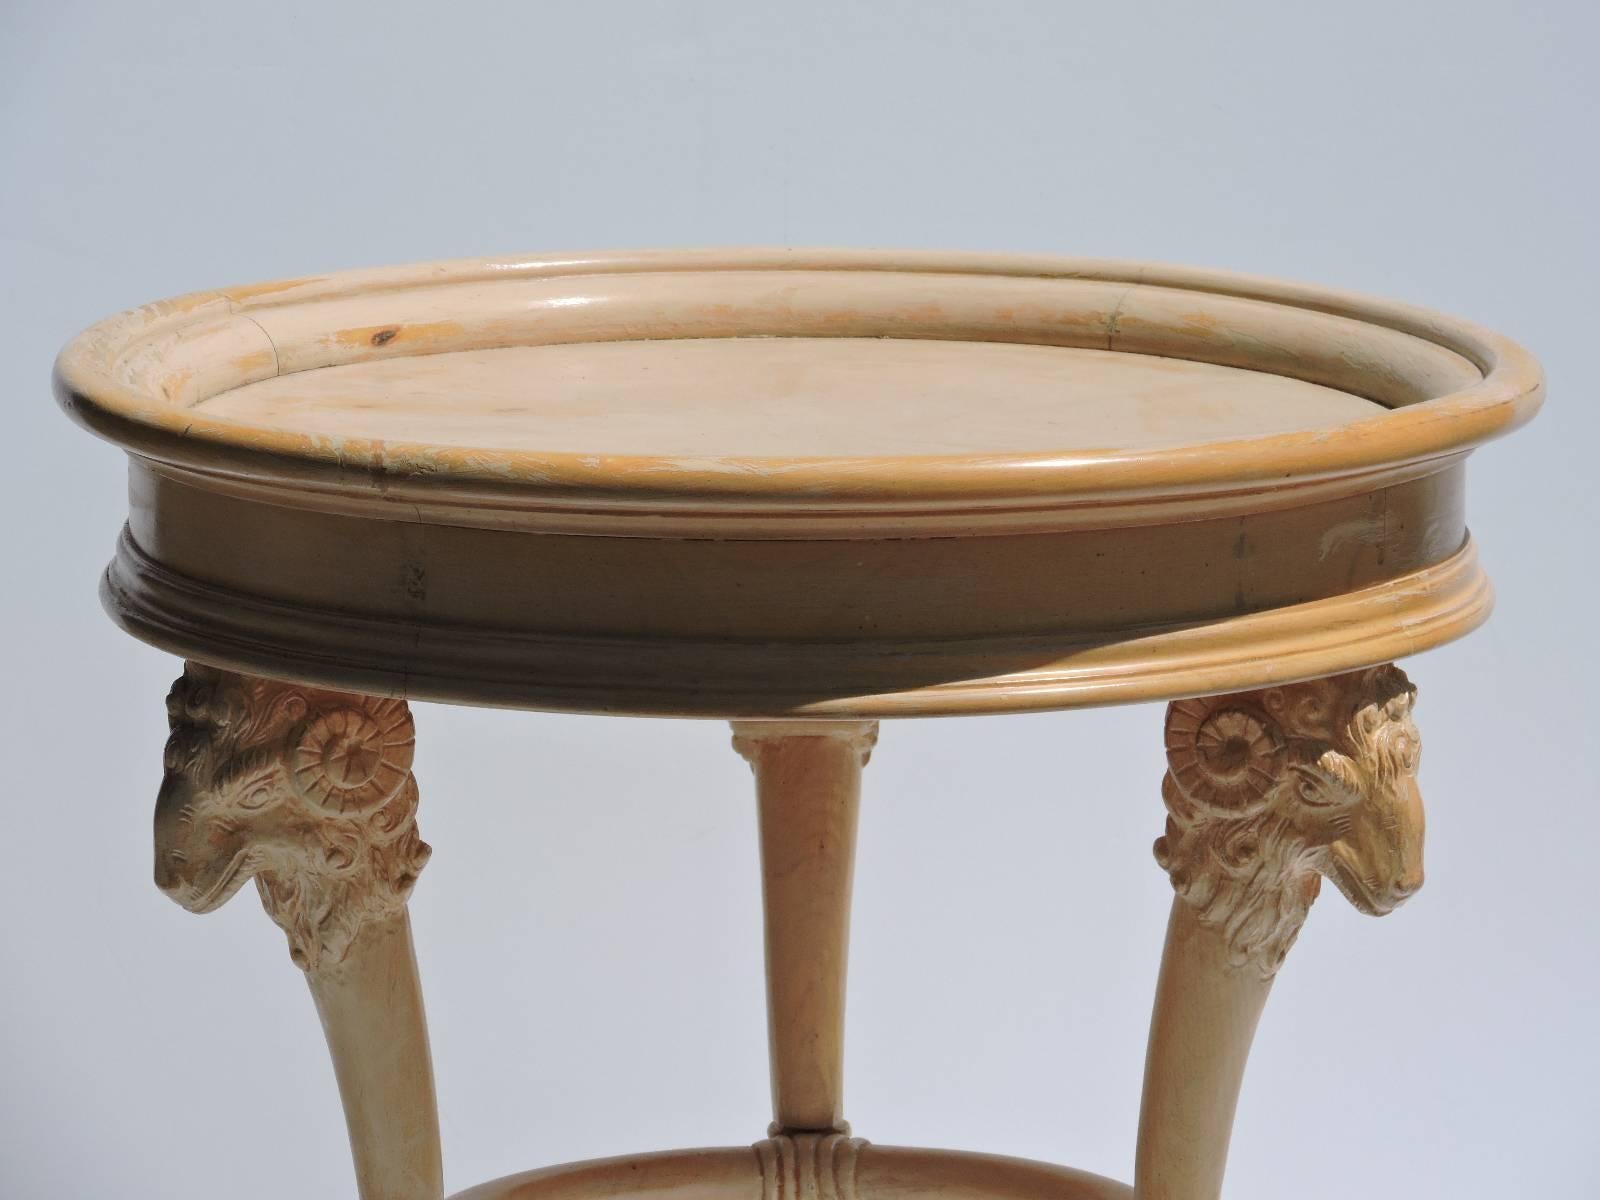 In the style of Grosfeld House, a mid 20th century Neoclassical style table in original white washed finish w/ three carved rams heads under apron of recessed circular top - legs ending in three hoof feet. Look at all pictures and read condition